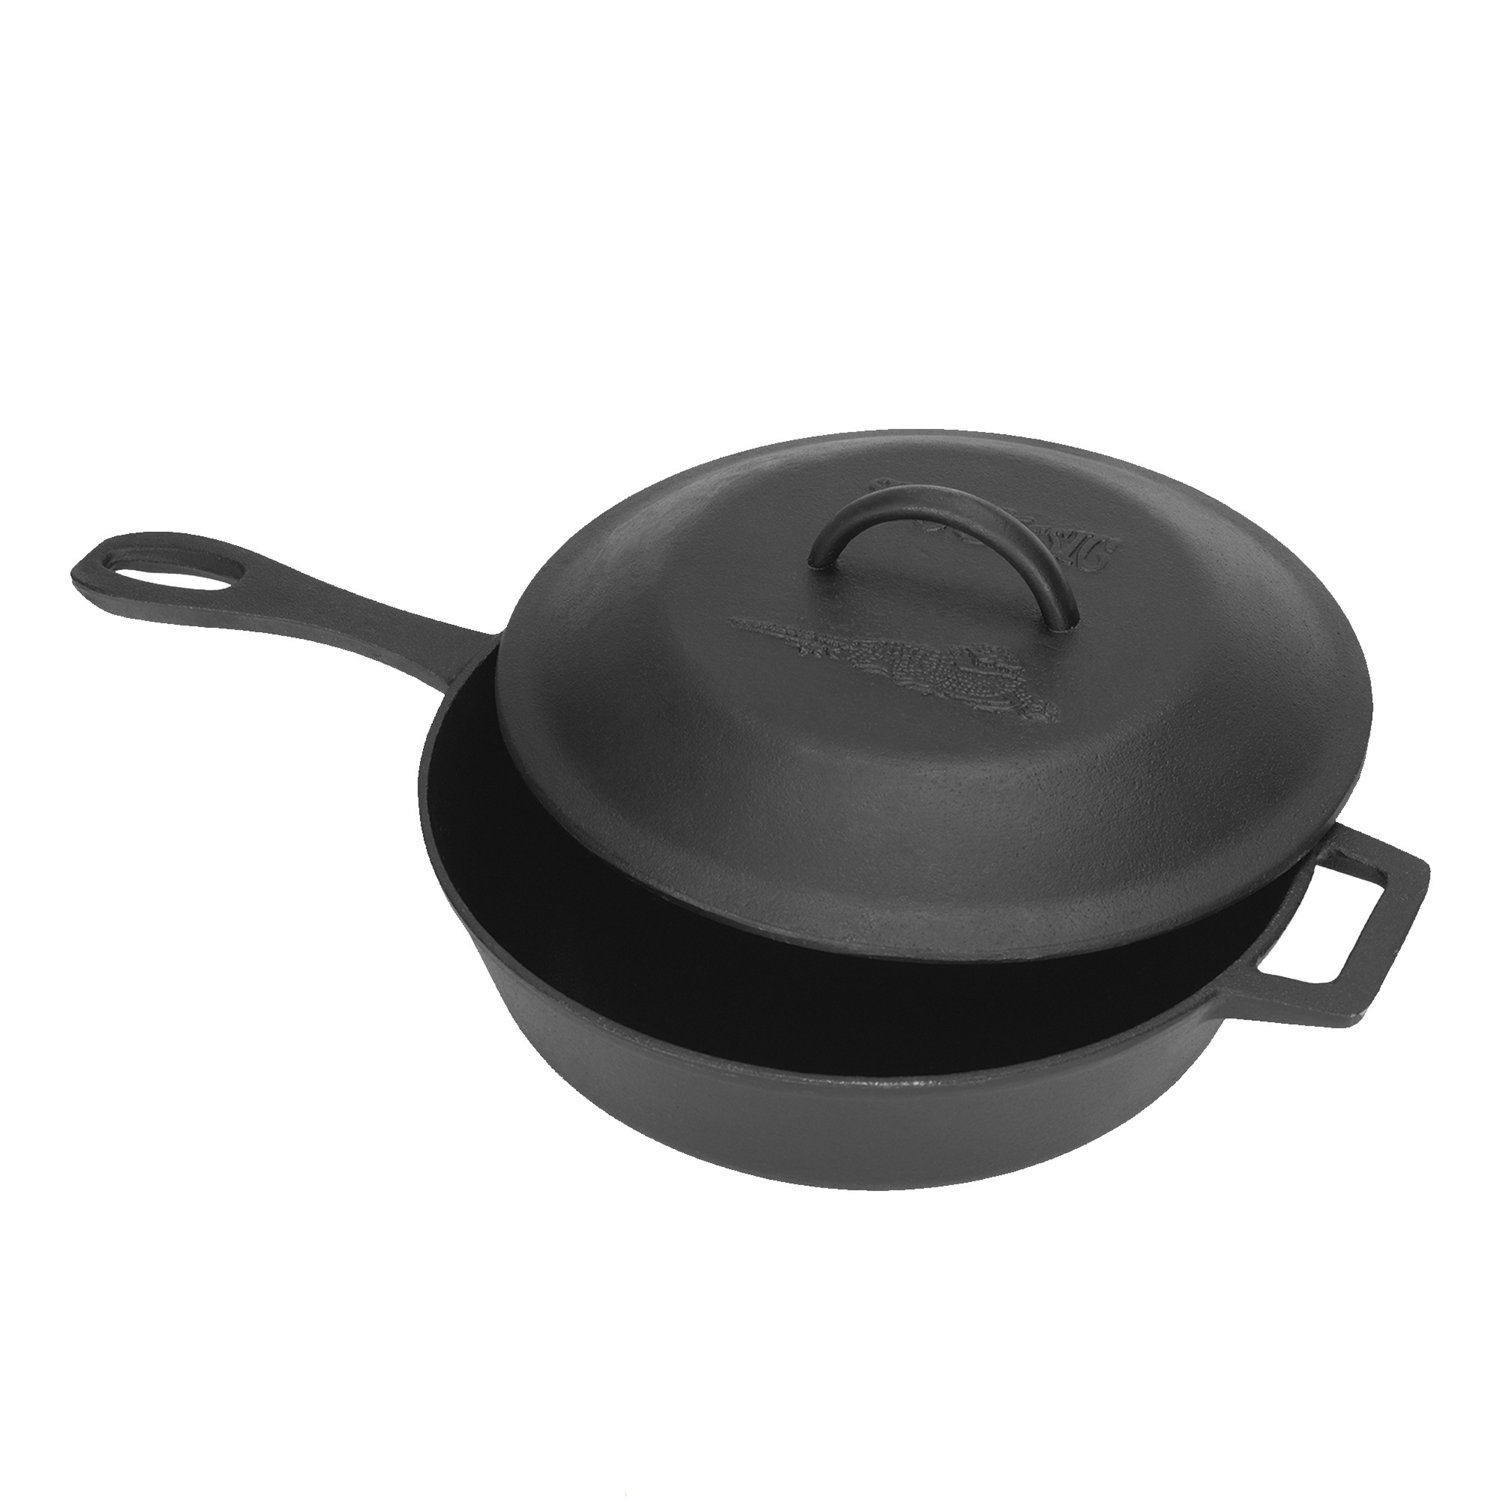 https://academy.scene7.com/is/image/academy//cookware,-utensils,-accessories/bayou-classic-3-qt-cast-iron-skillet-with-self-basting-lid-7440-/9c7c08a7d8c843c5ac35a30c566f3fb4?$pdp-gallery-ng$